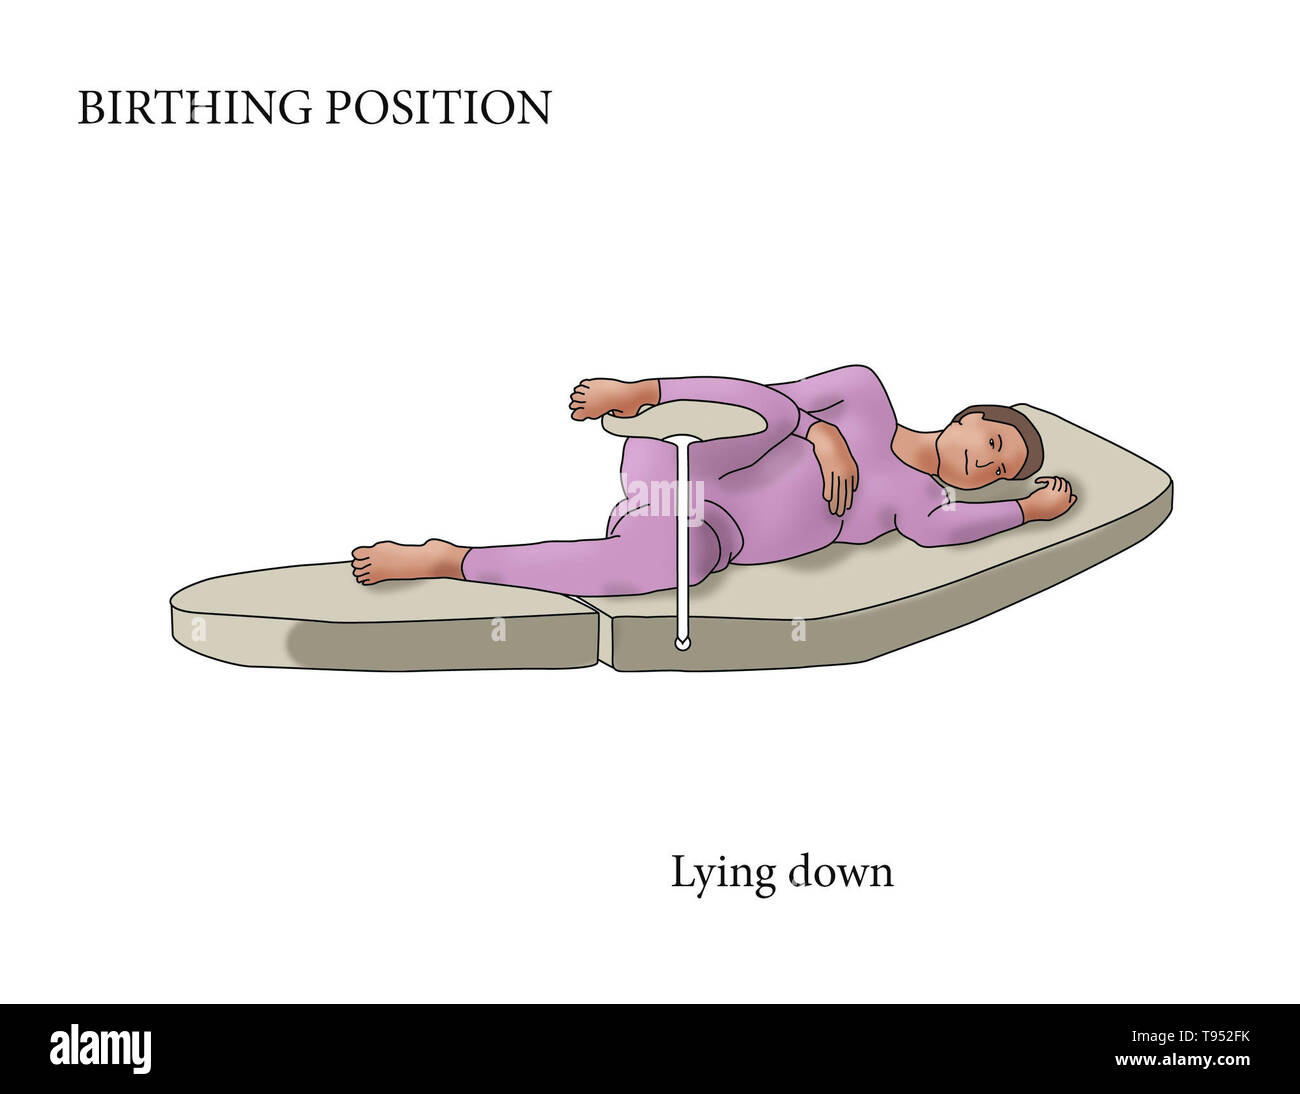 Illustration showing a woman in the Lying Down birthing position. Stock Photo